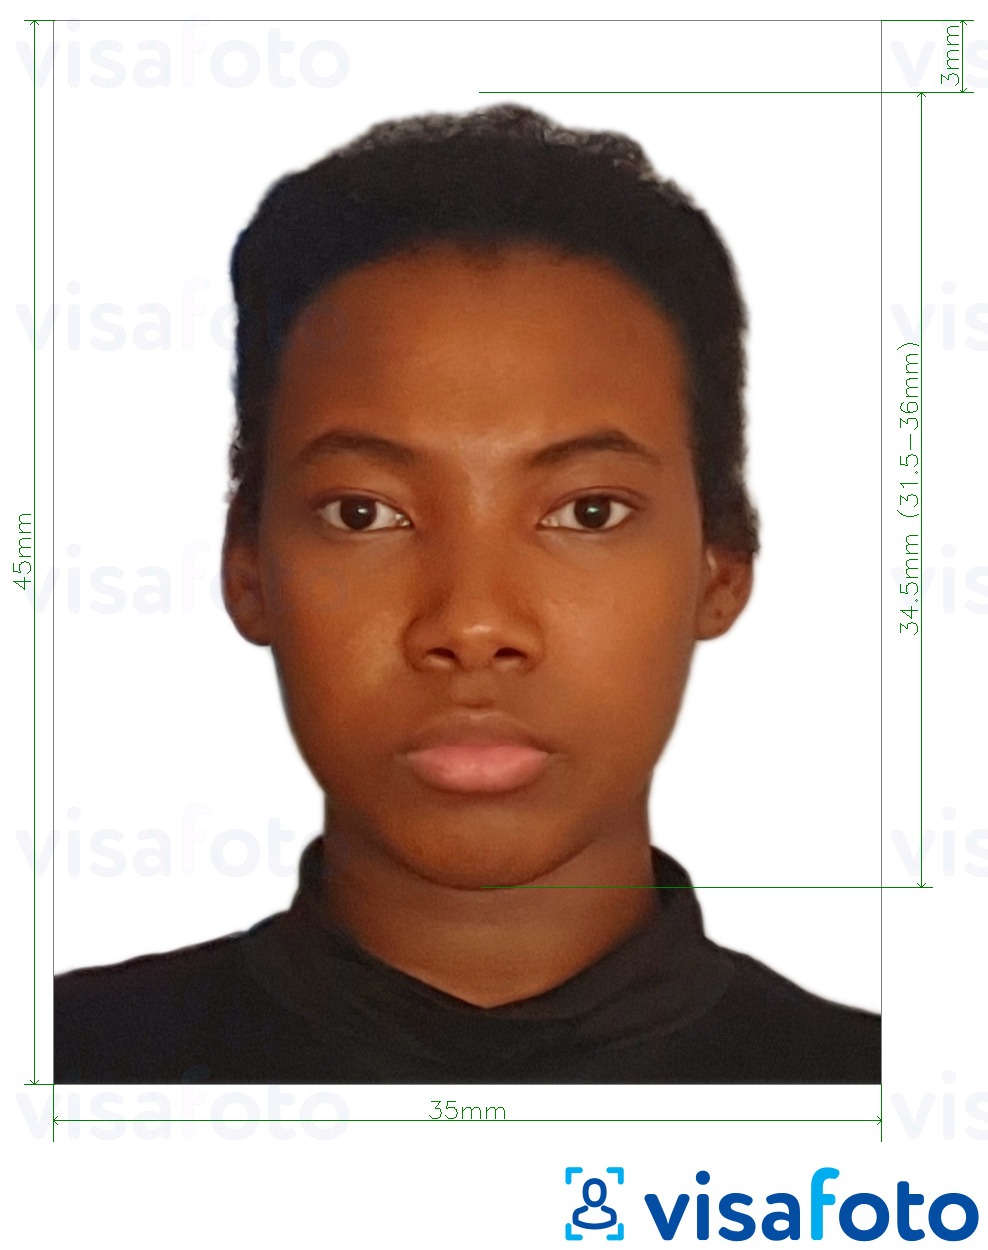 Example of photo for Liberia passport 35x45 mm (3.5x4.5 cm) with exact size specification